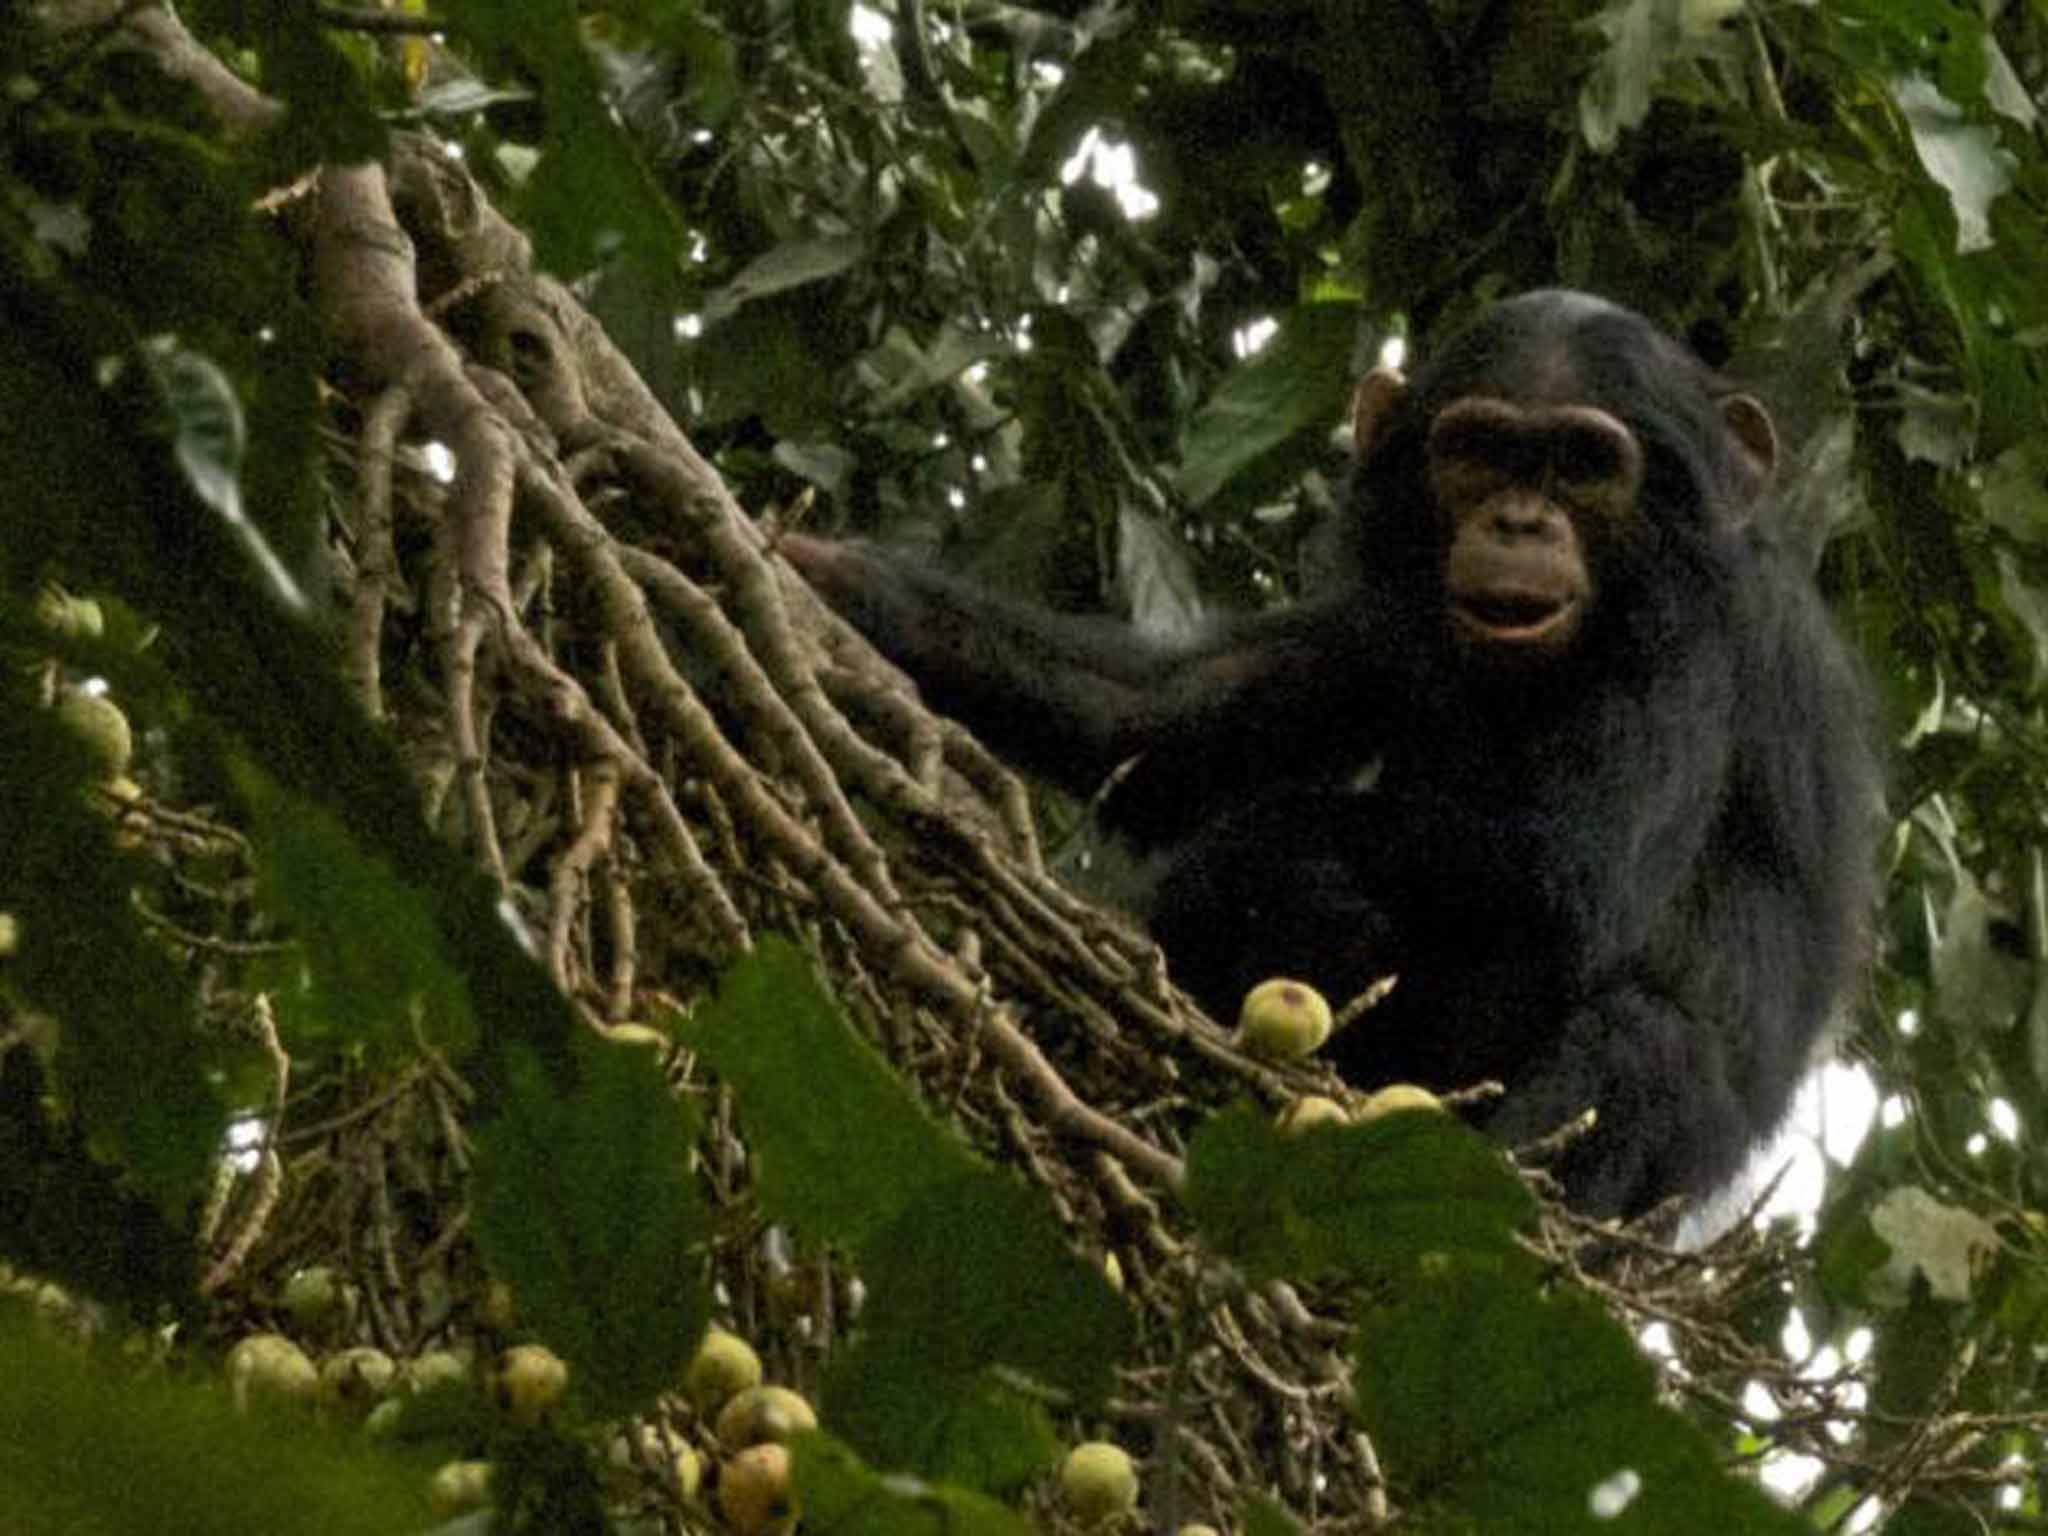 Chimpanzees are the closest modern species to humans